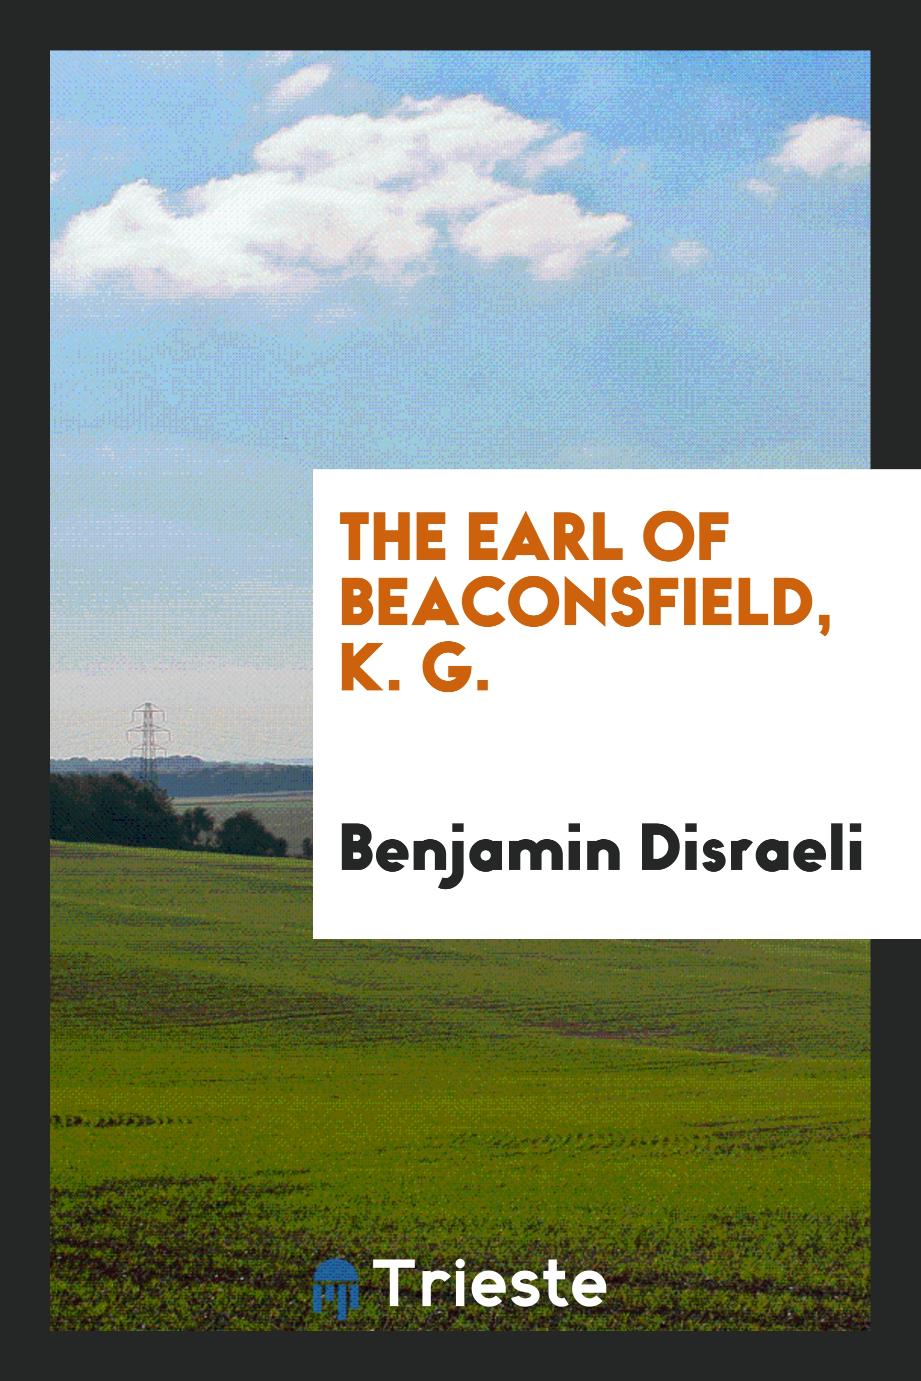 The Earl of Beaconsfield, K. G.